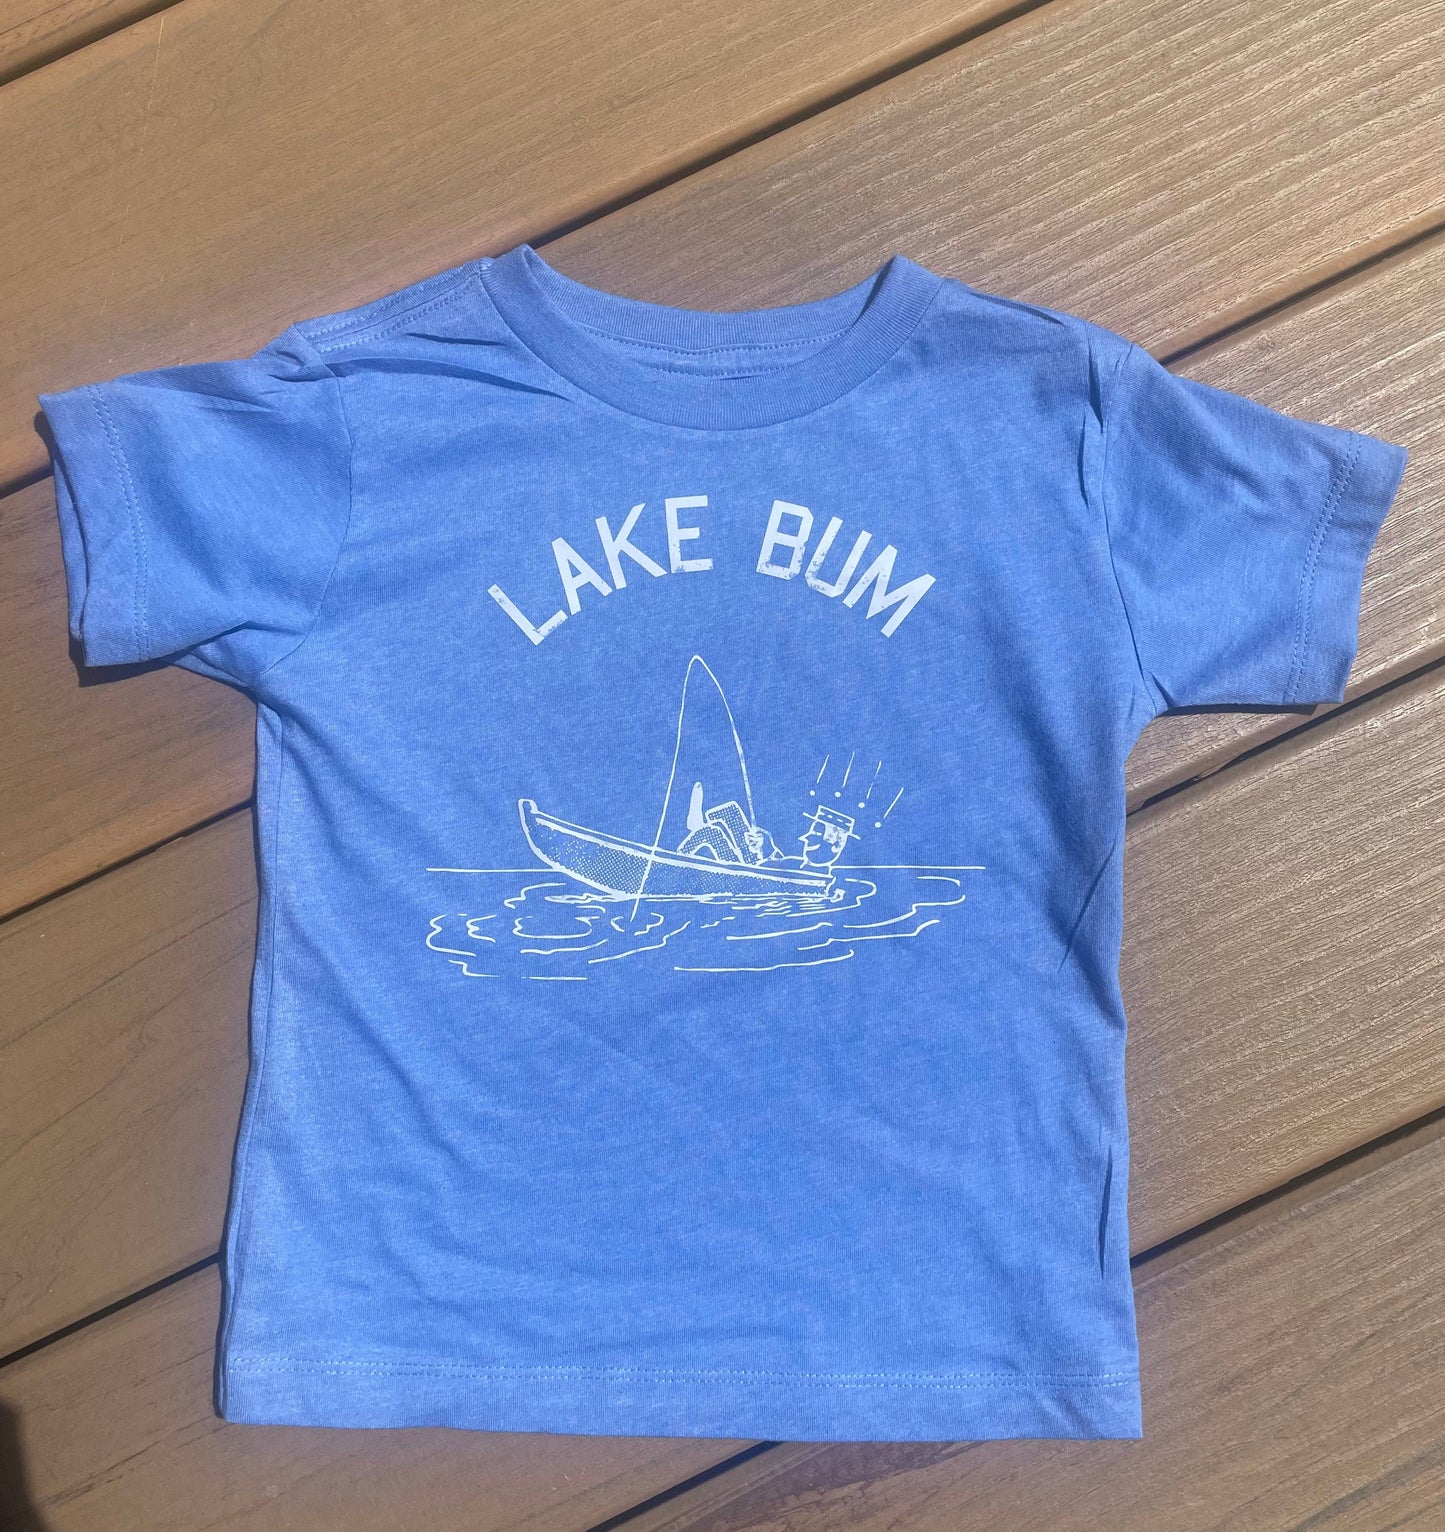 Lake Bum | Toddler Tee | Blue with White letters